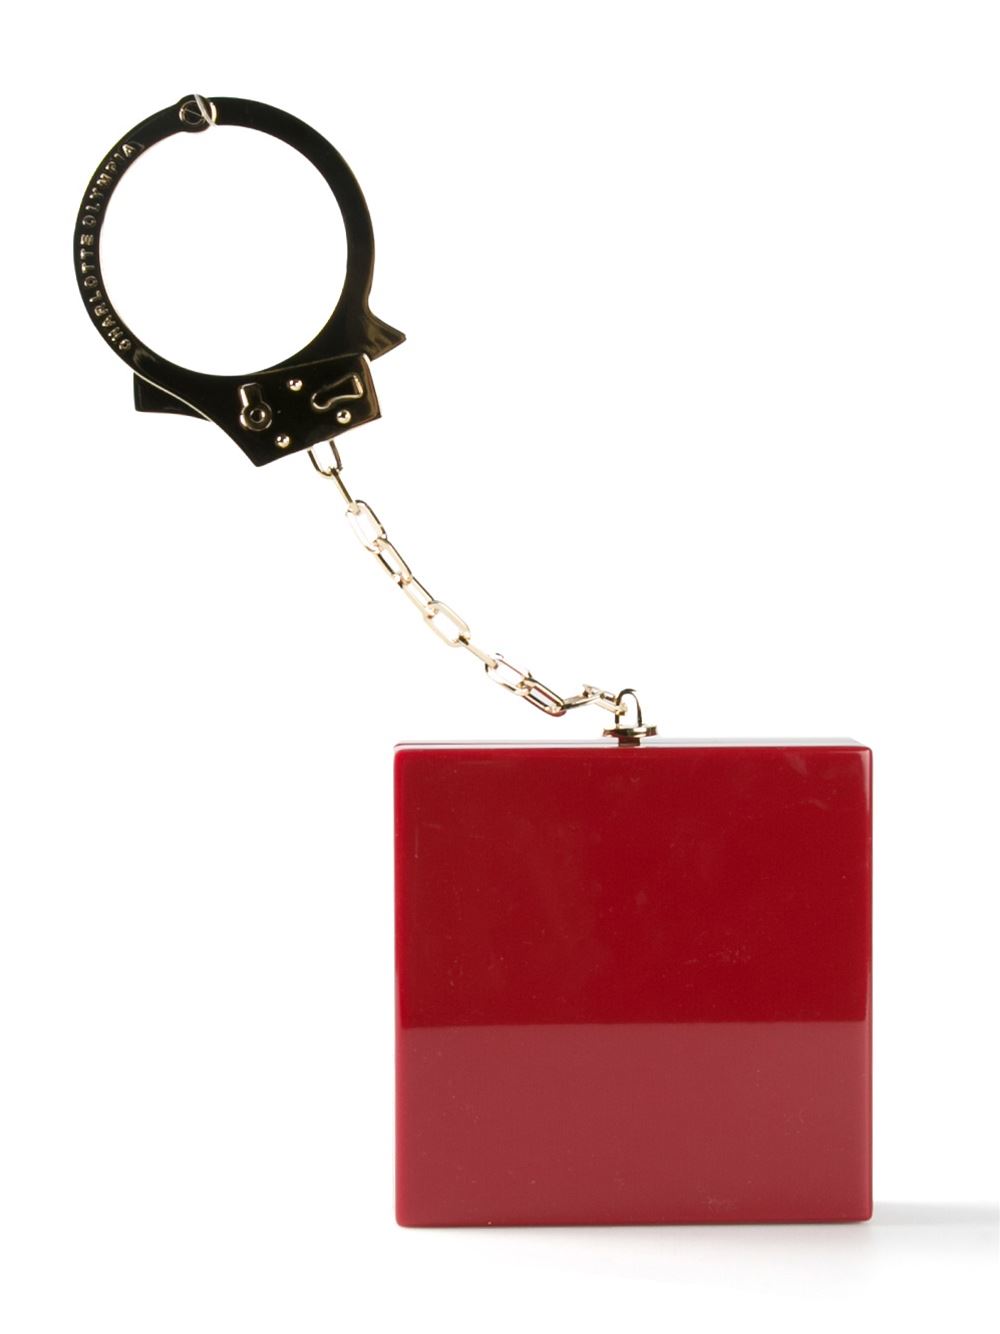 Crimson red Kinky clutch from Charlotte Olympia